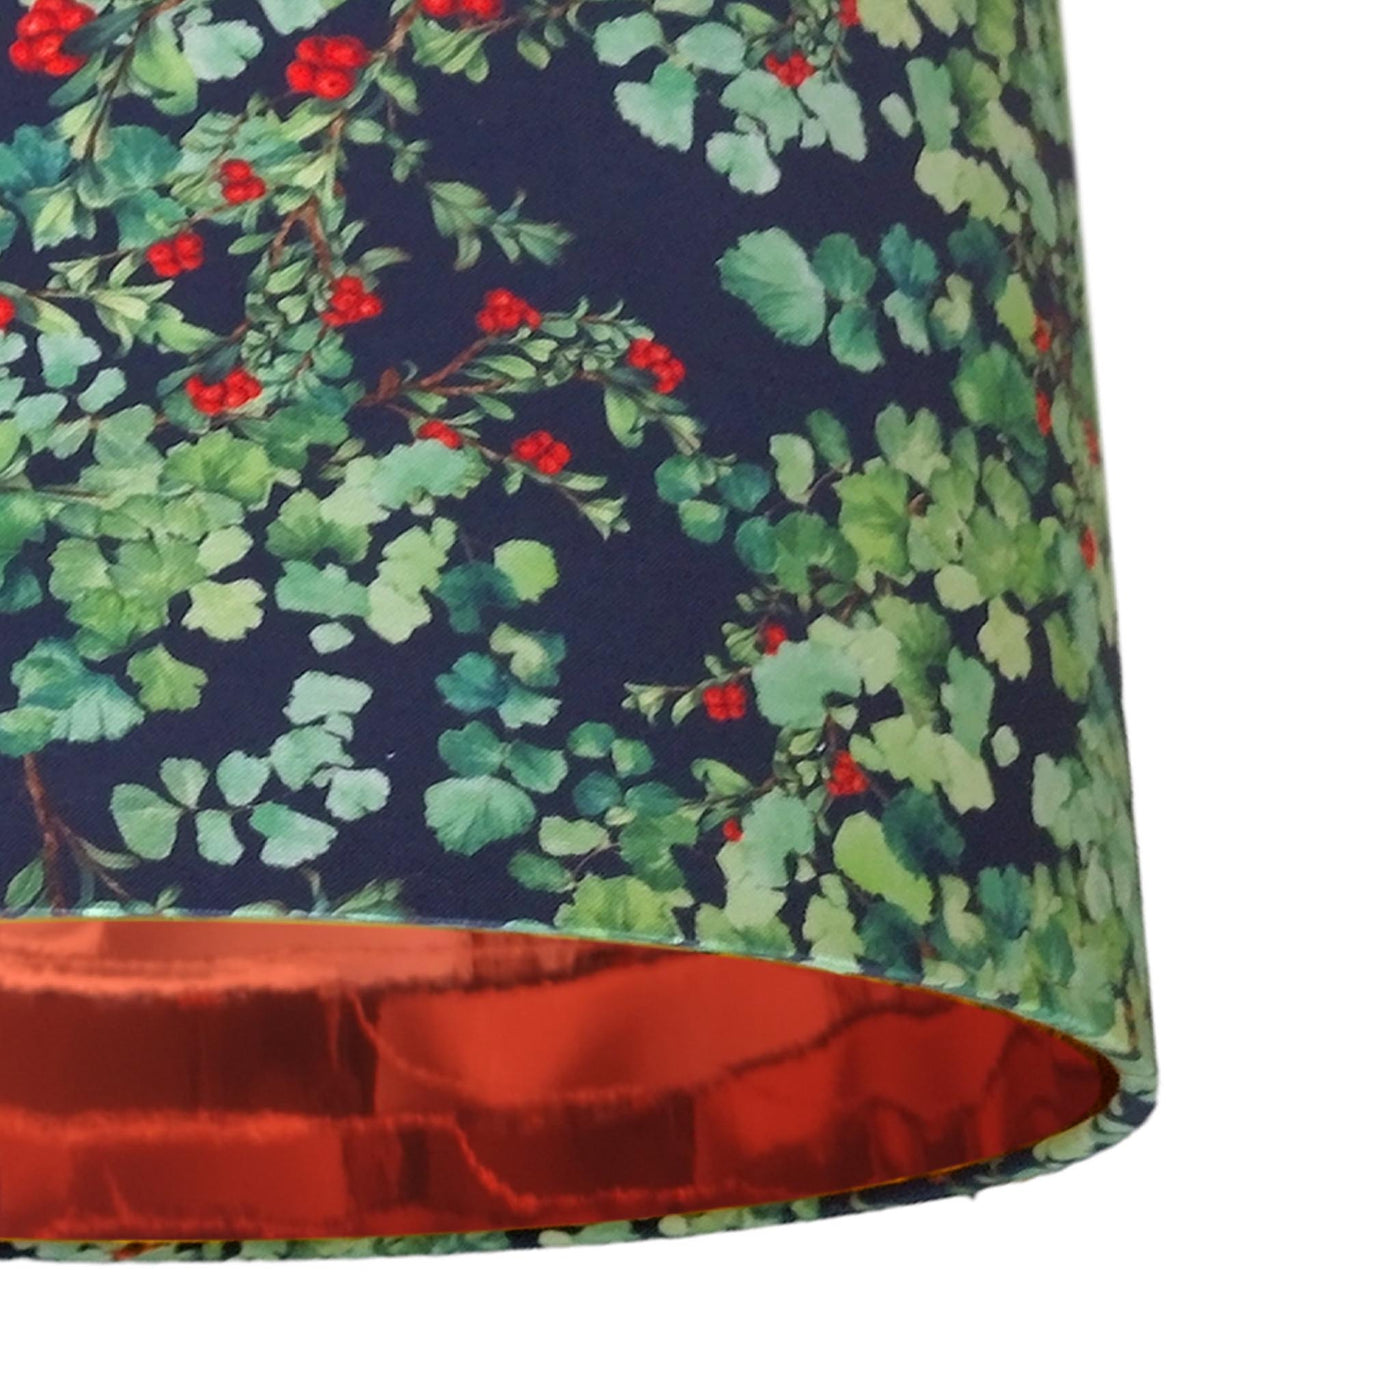 close up of the Red Berries Cotton Lampshade with Mirror Copper